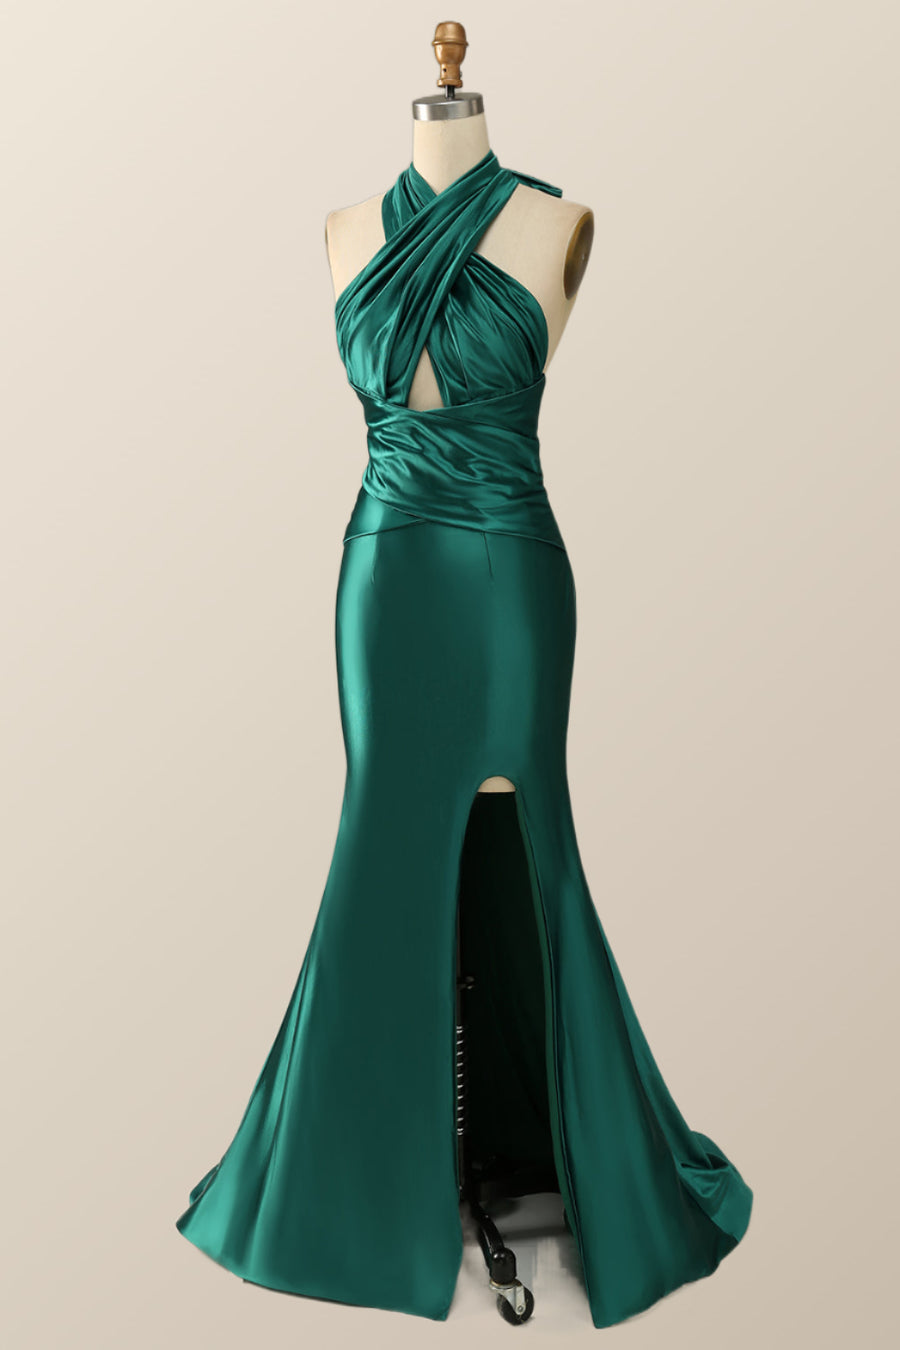 Green Cross Front Mermaid Long Formal Dress with Slit